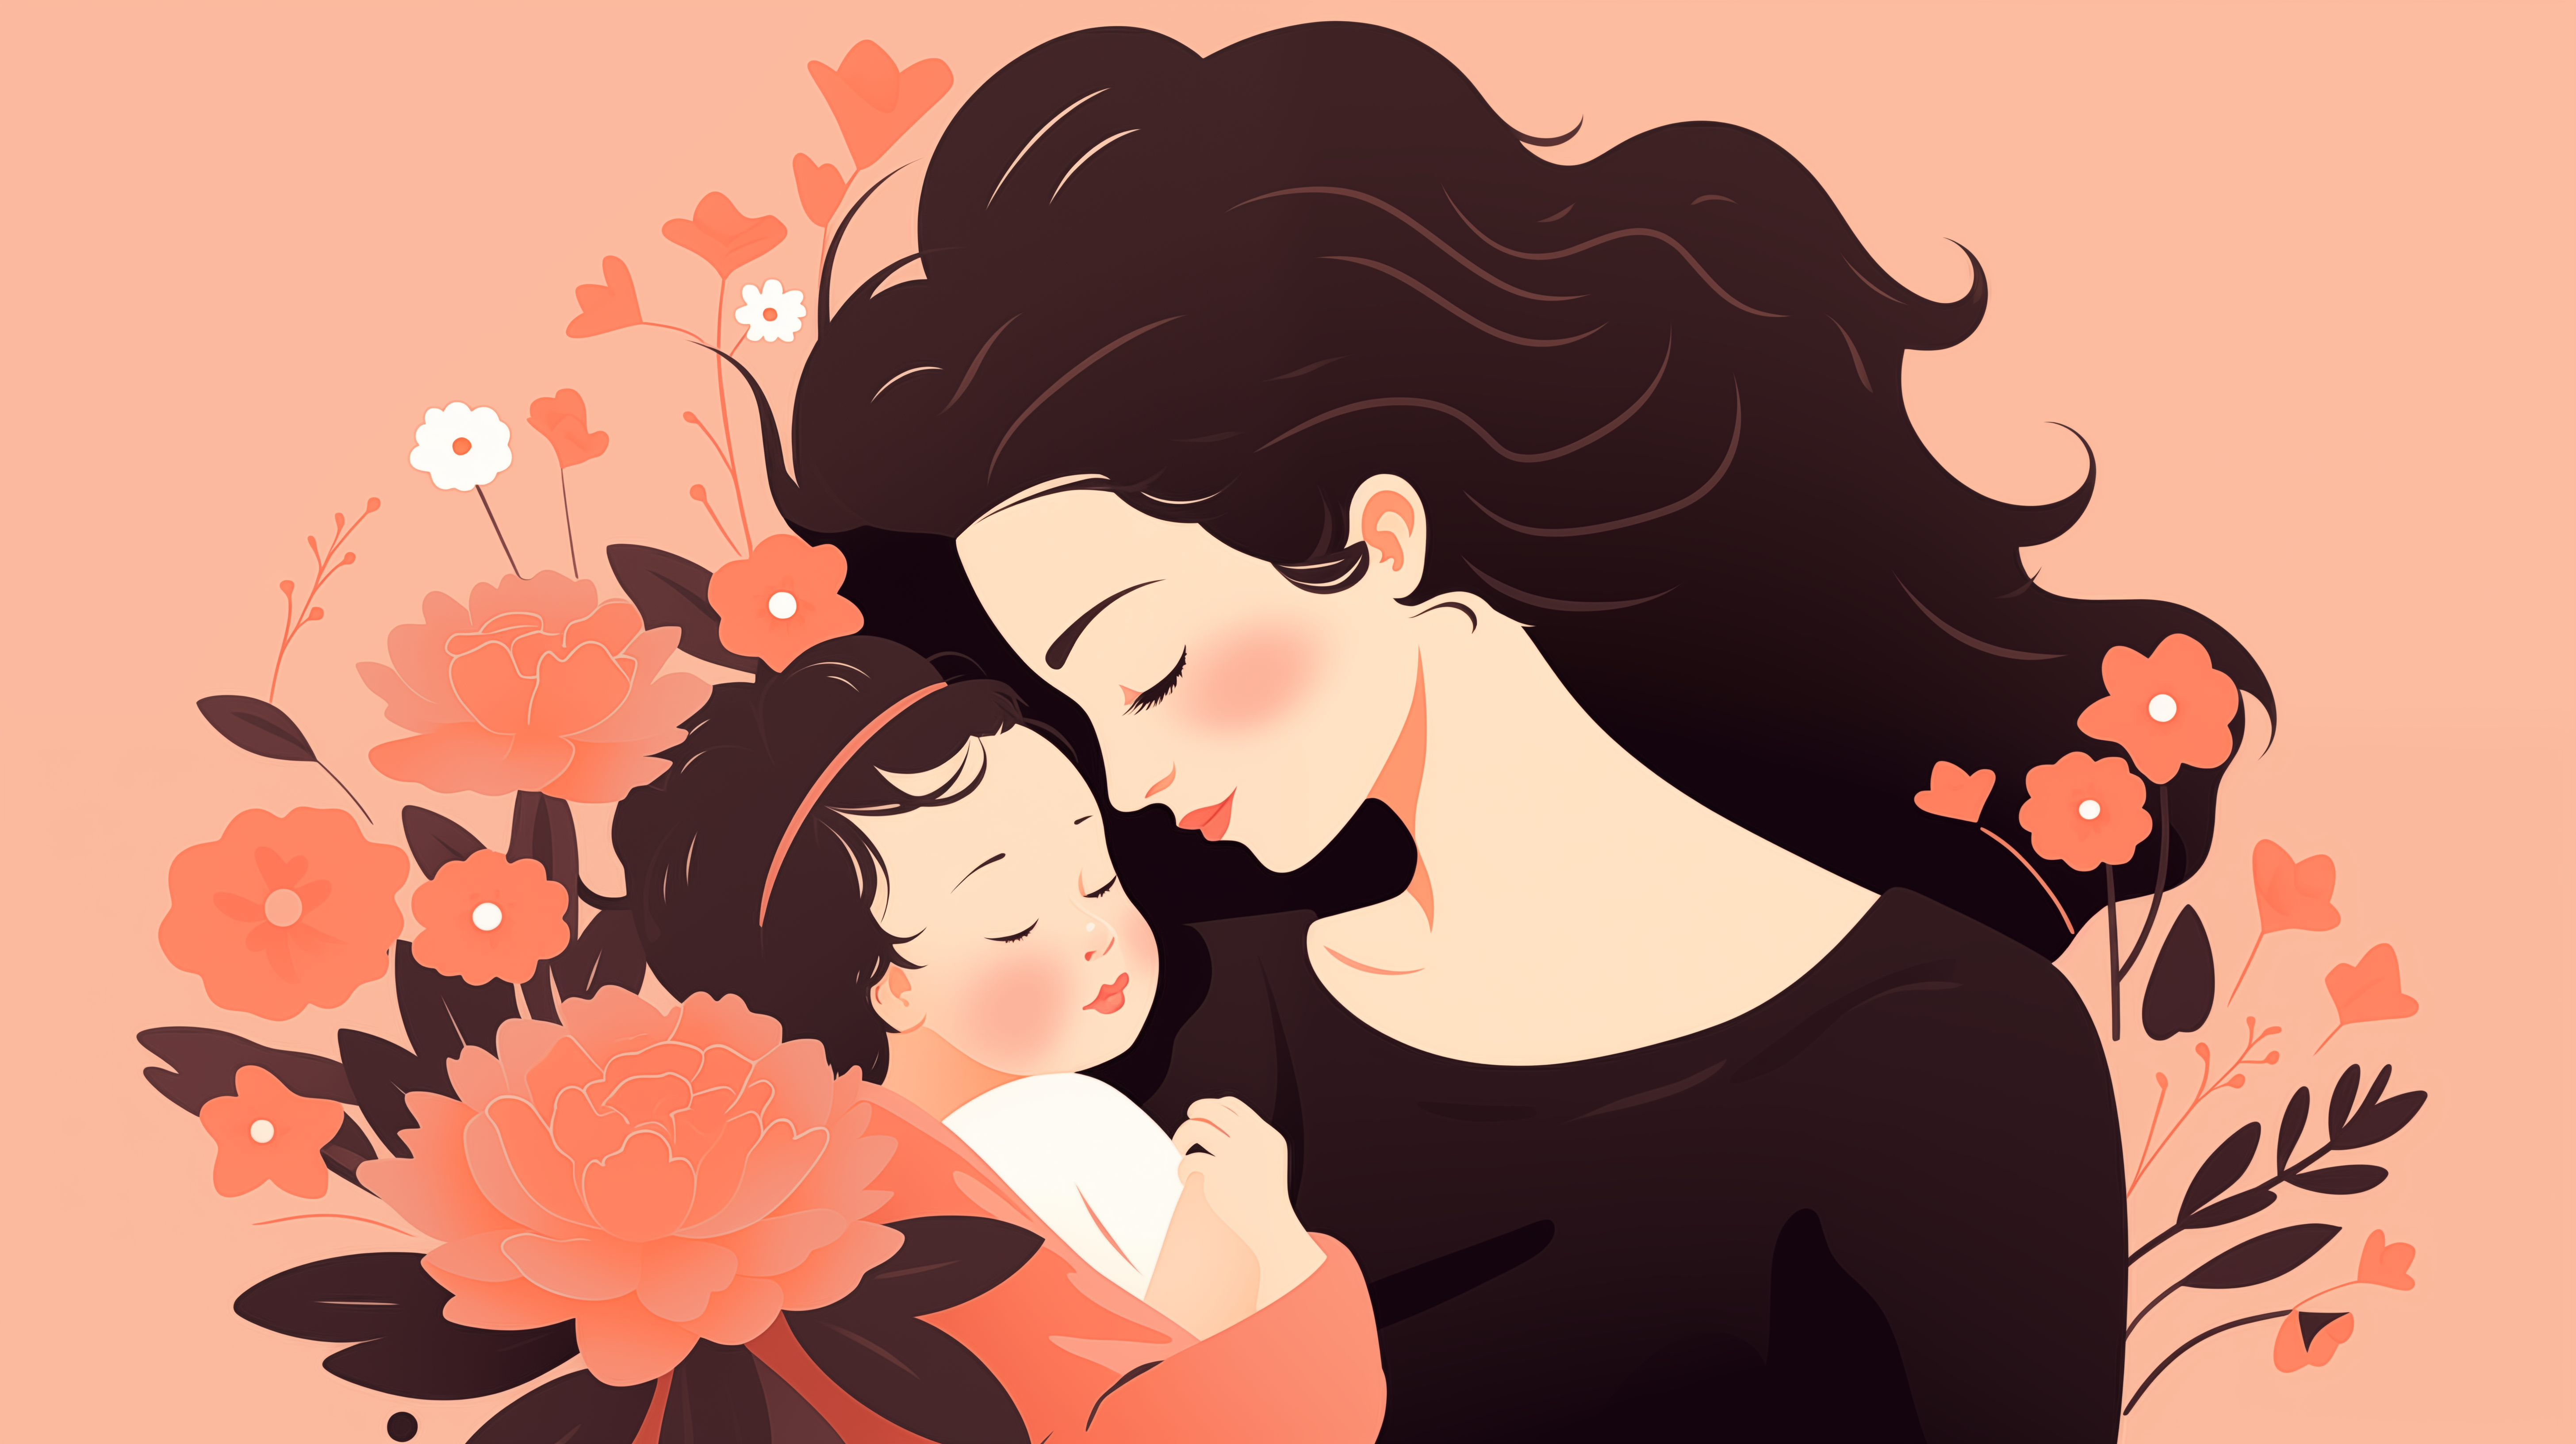 Mother lovingly embracing child surrounded by flowers, perfect for Mother's Day HD desktop wallpaper and background.